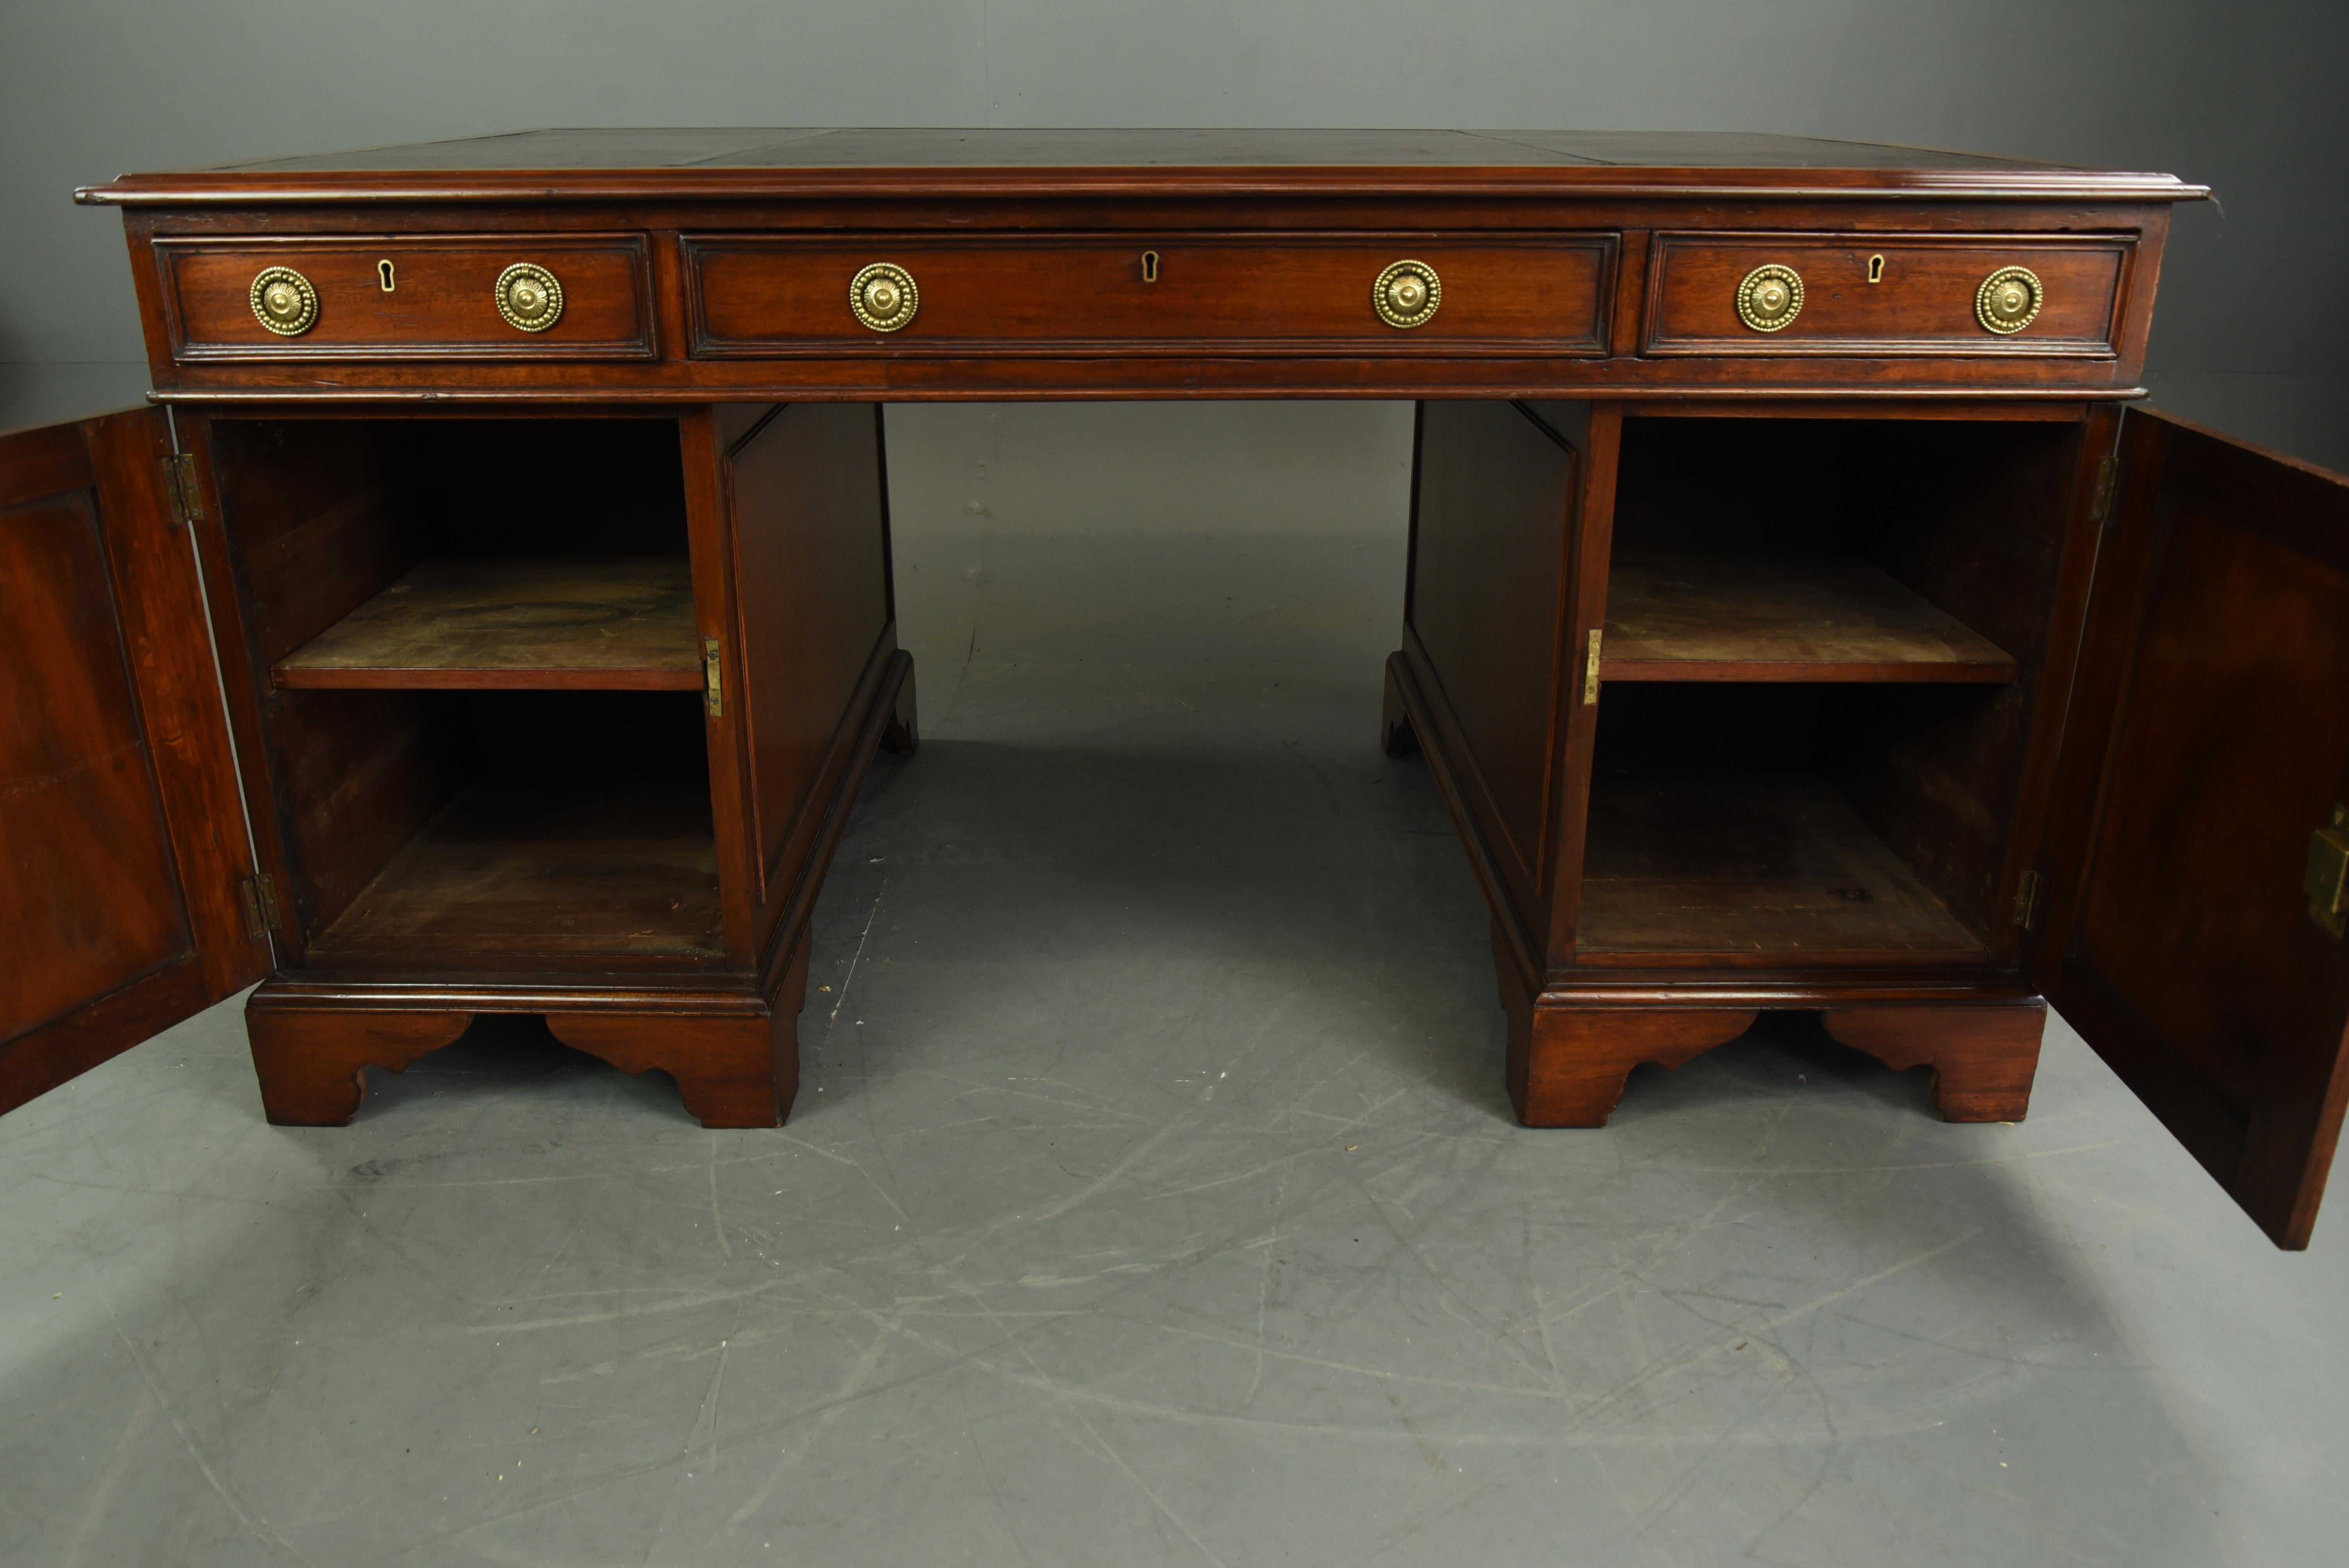 Late 19th Century English Antique 19th century partners desk S & H JEWELL